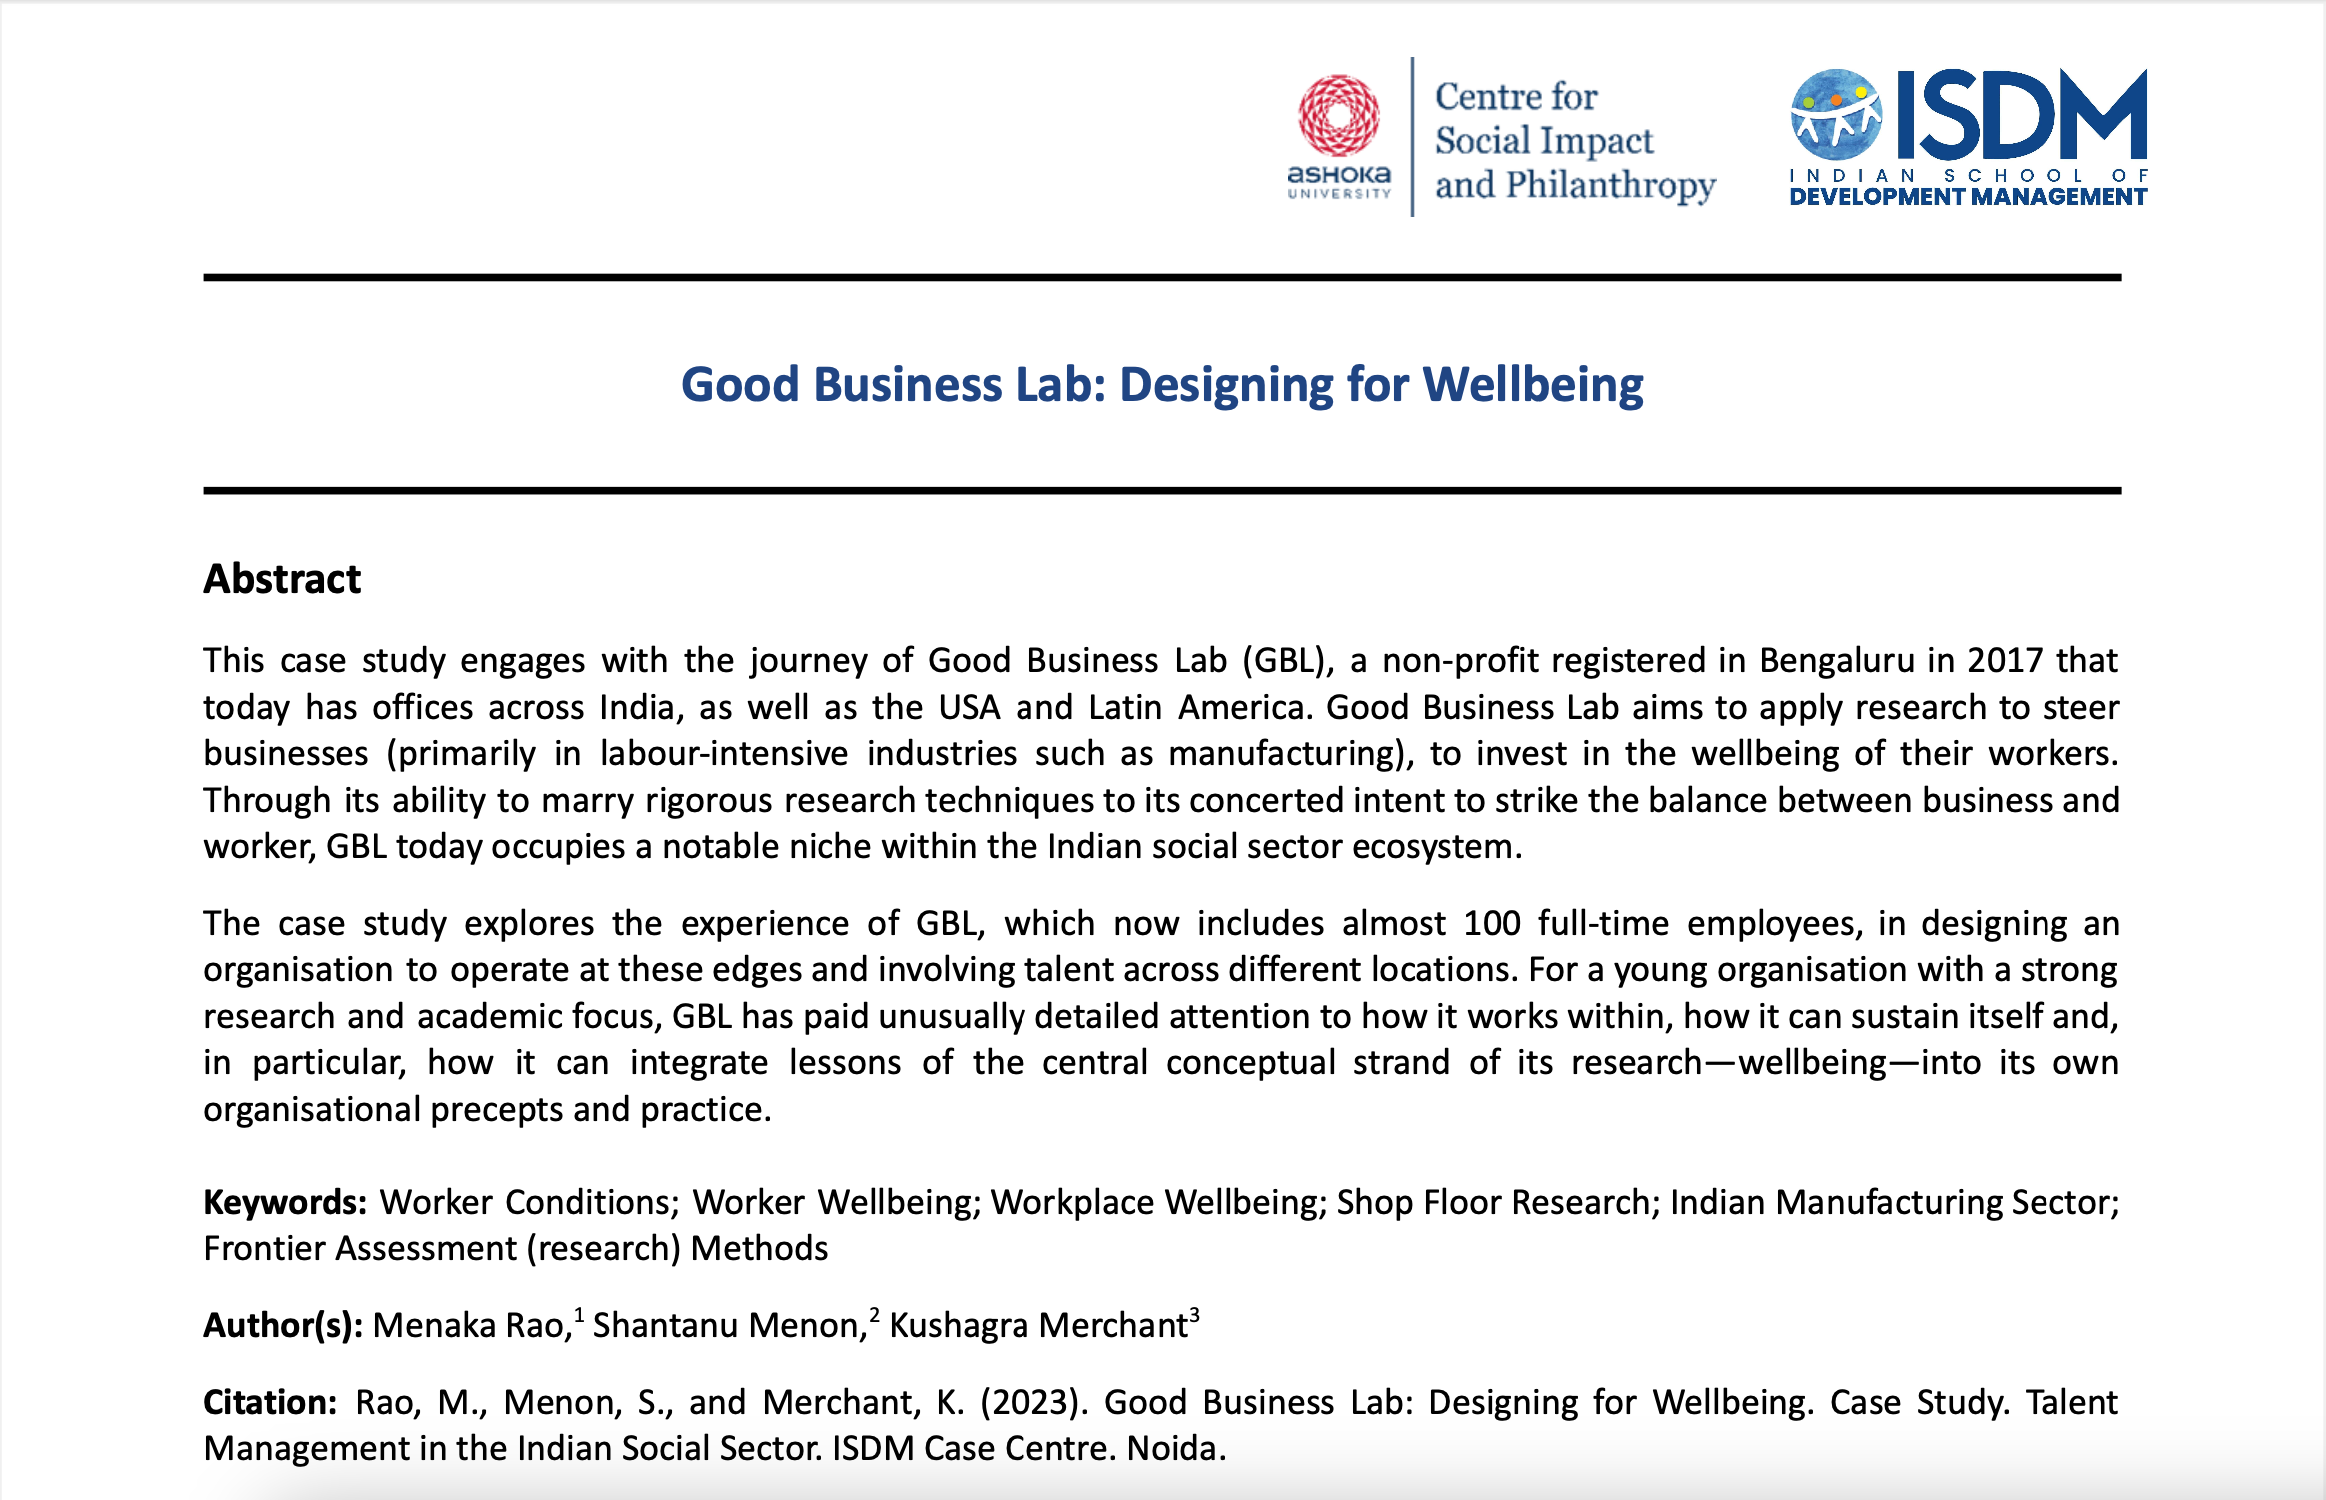 Good Business Lab: Designing for Wellbeing Image